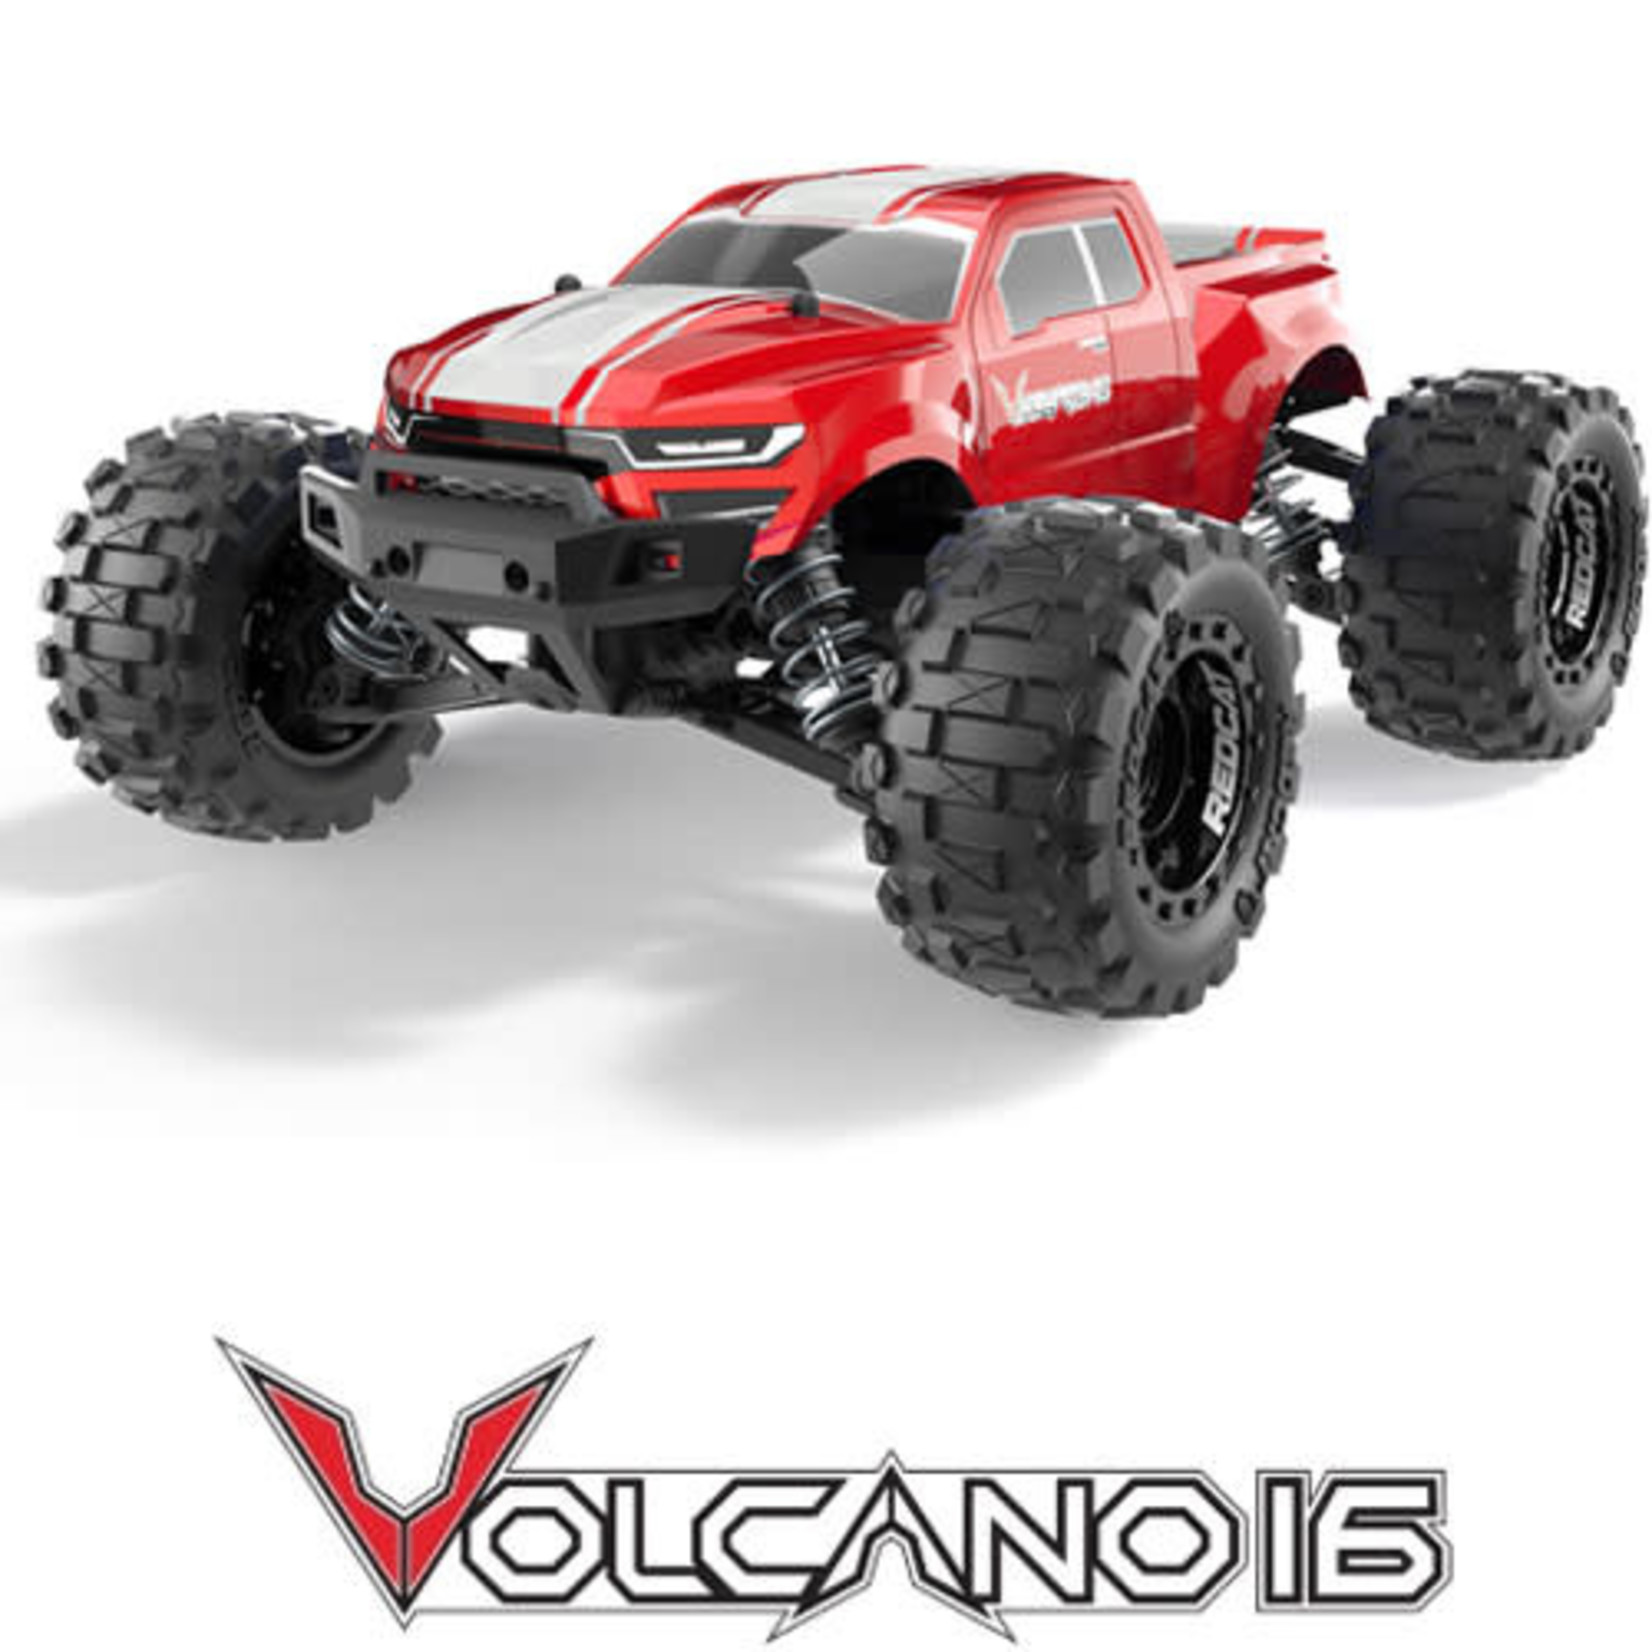 Redcat Racing RER13648  REDCAT VOLCANO-16 1/16 SCALE BRUSHED MONSTER TRUCK  RED